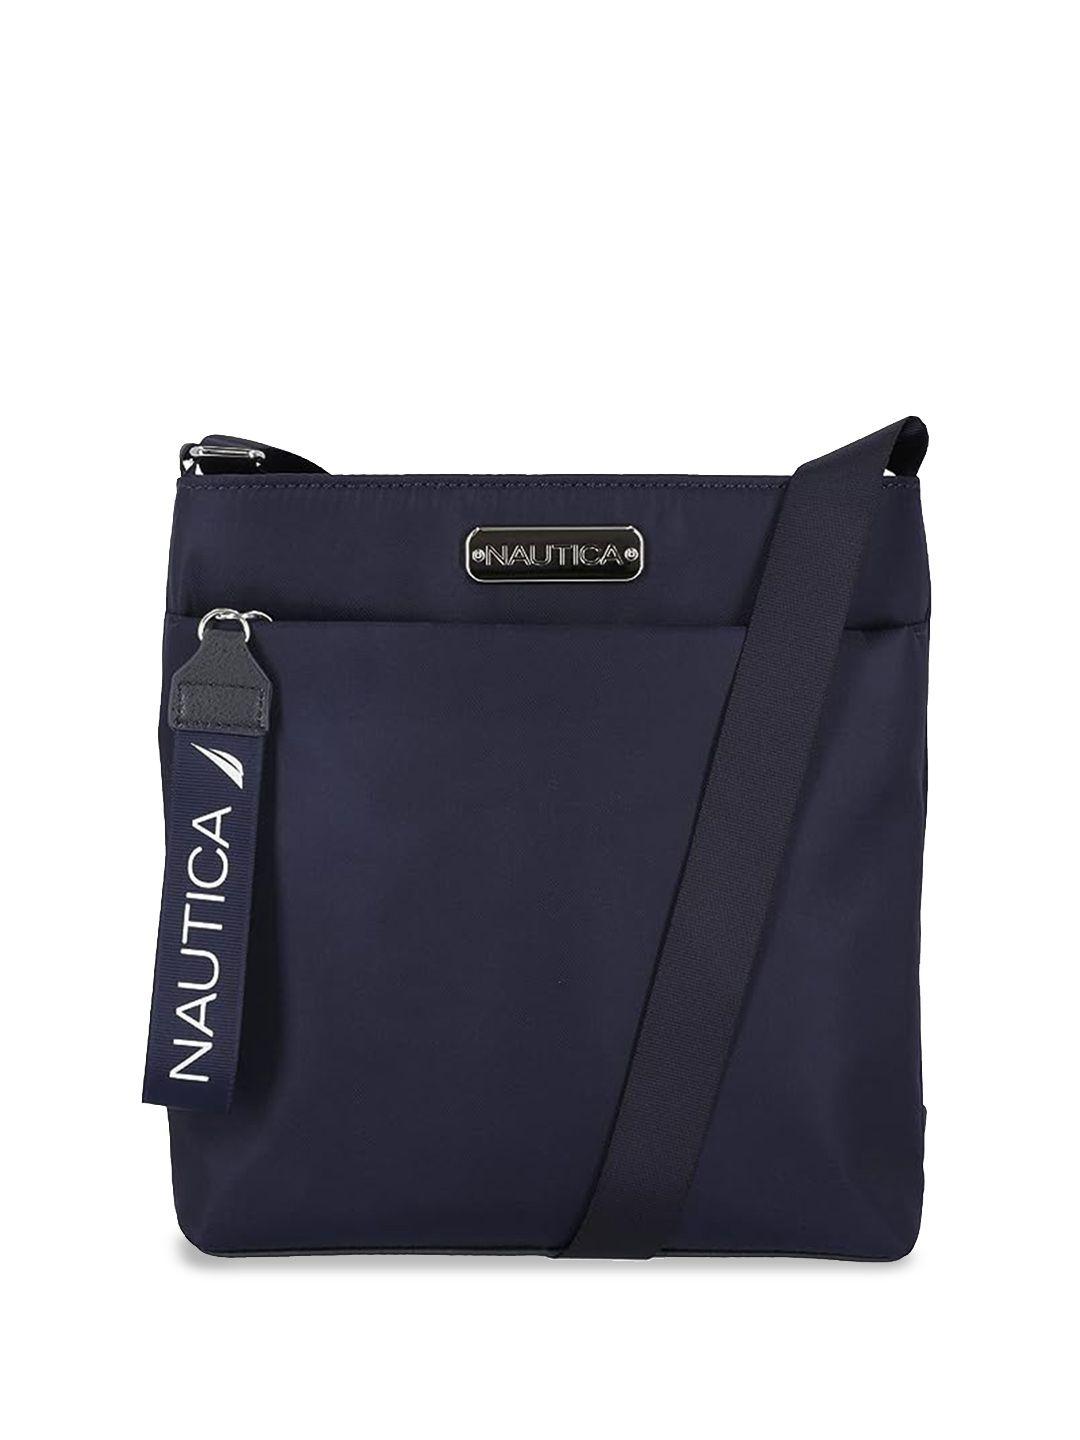 nautica oversized structured sling bag with quilted